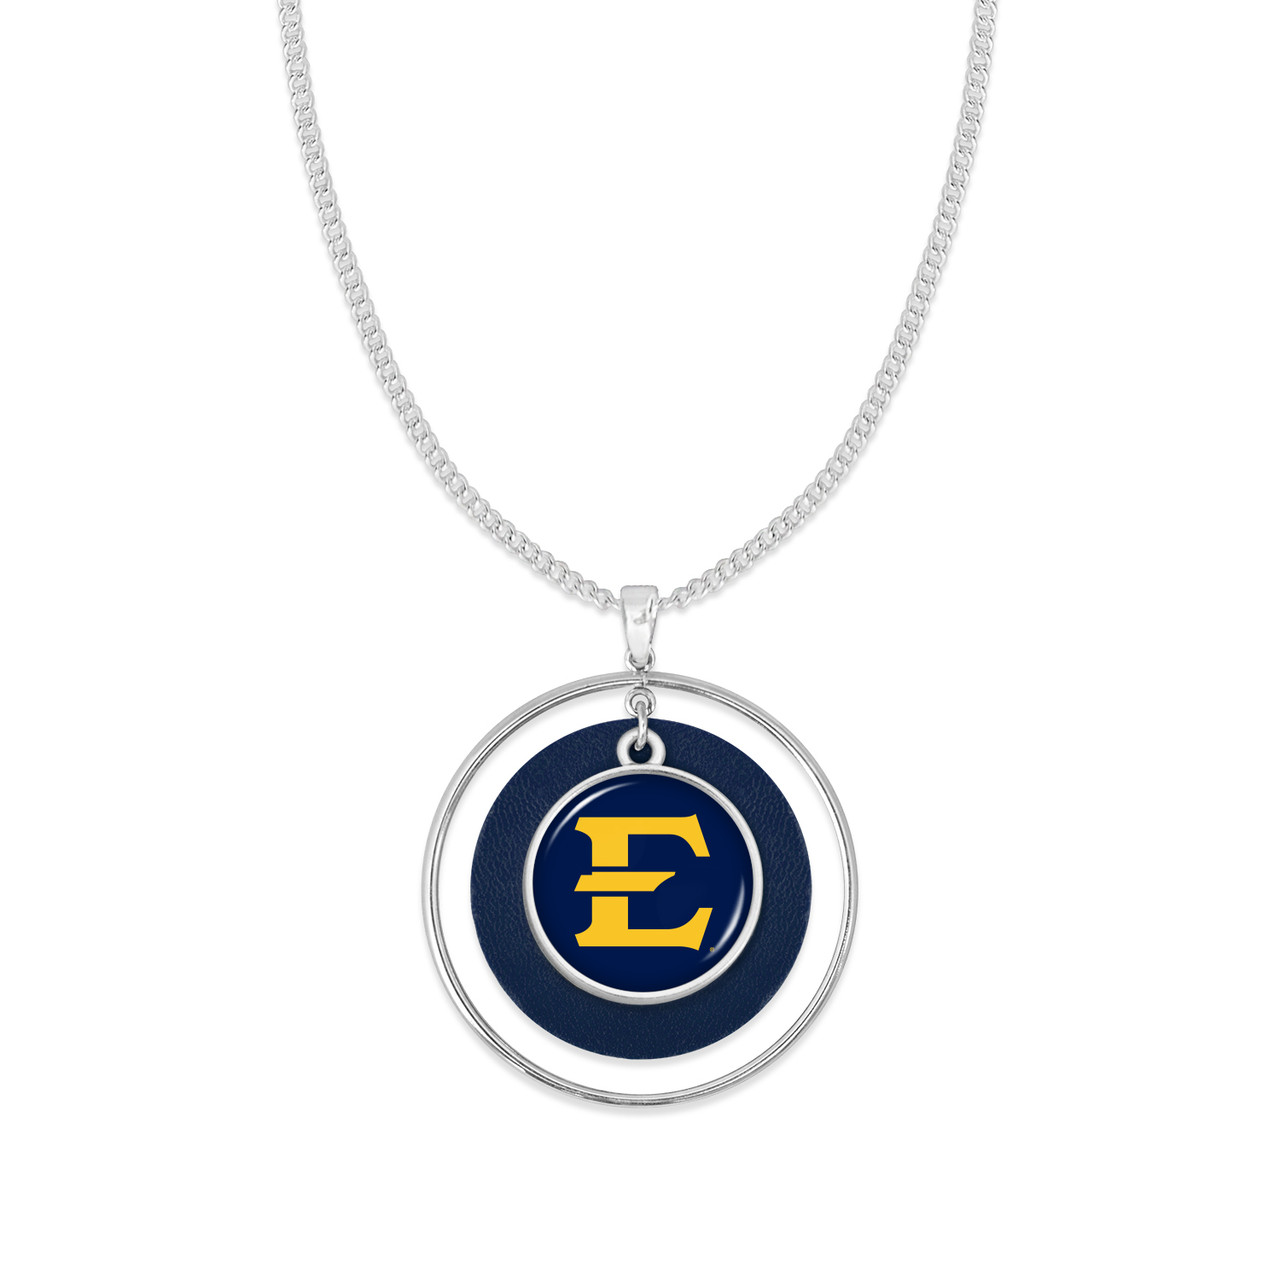 East Tennessee State Buccaneers Necklace- Lindy